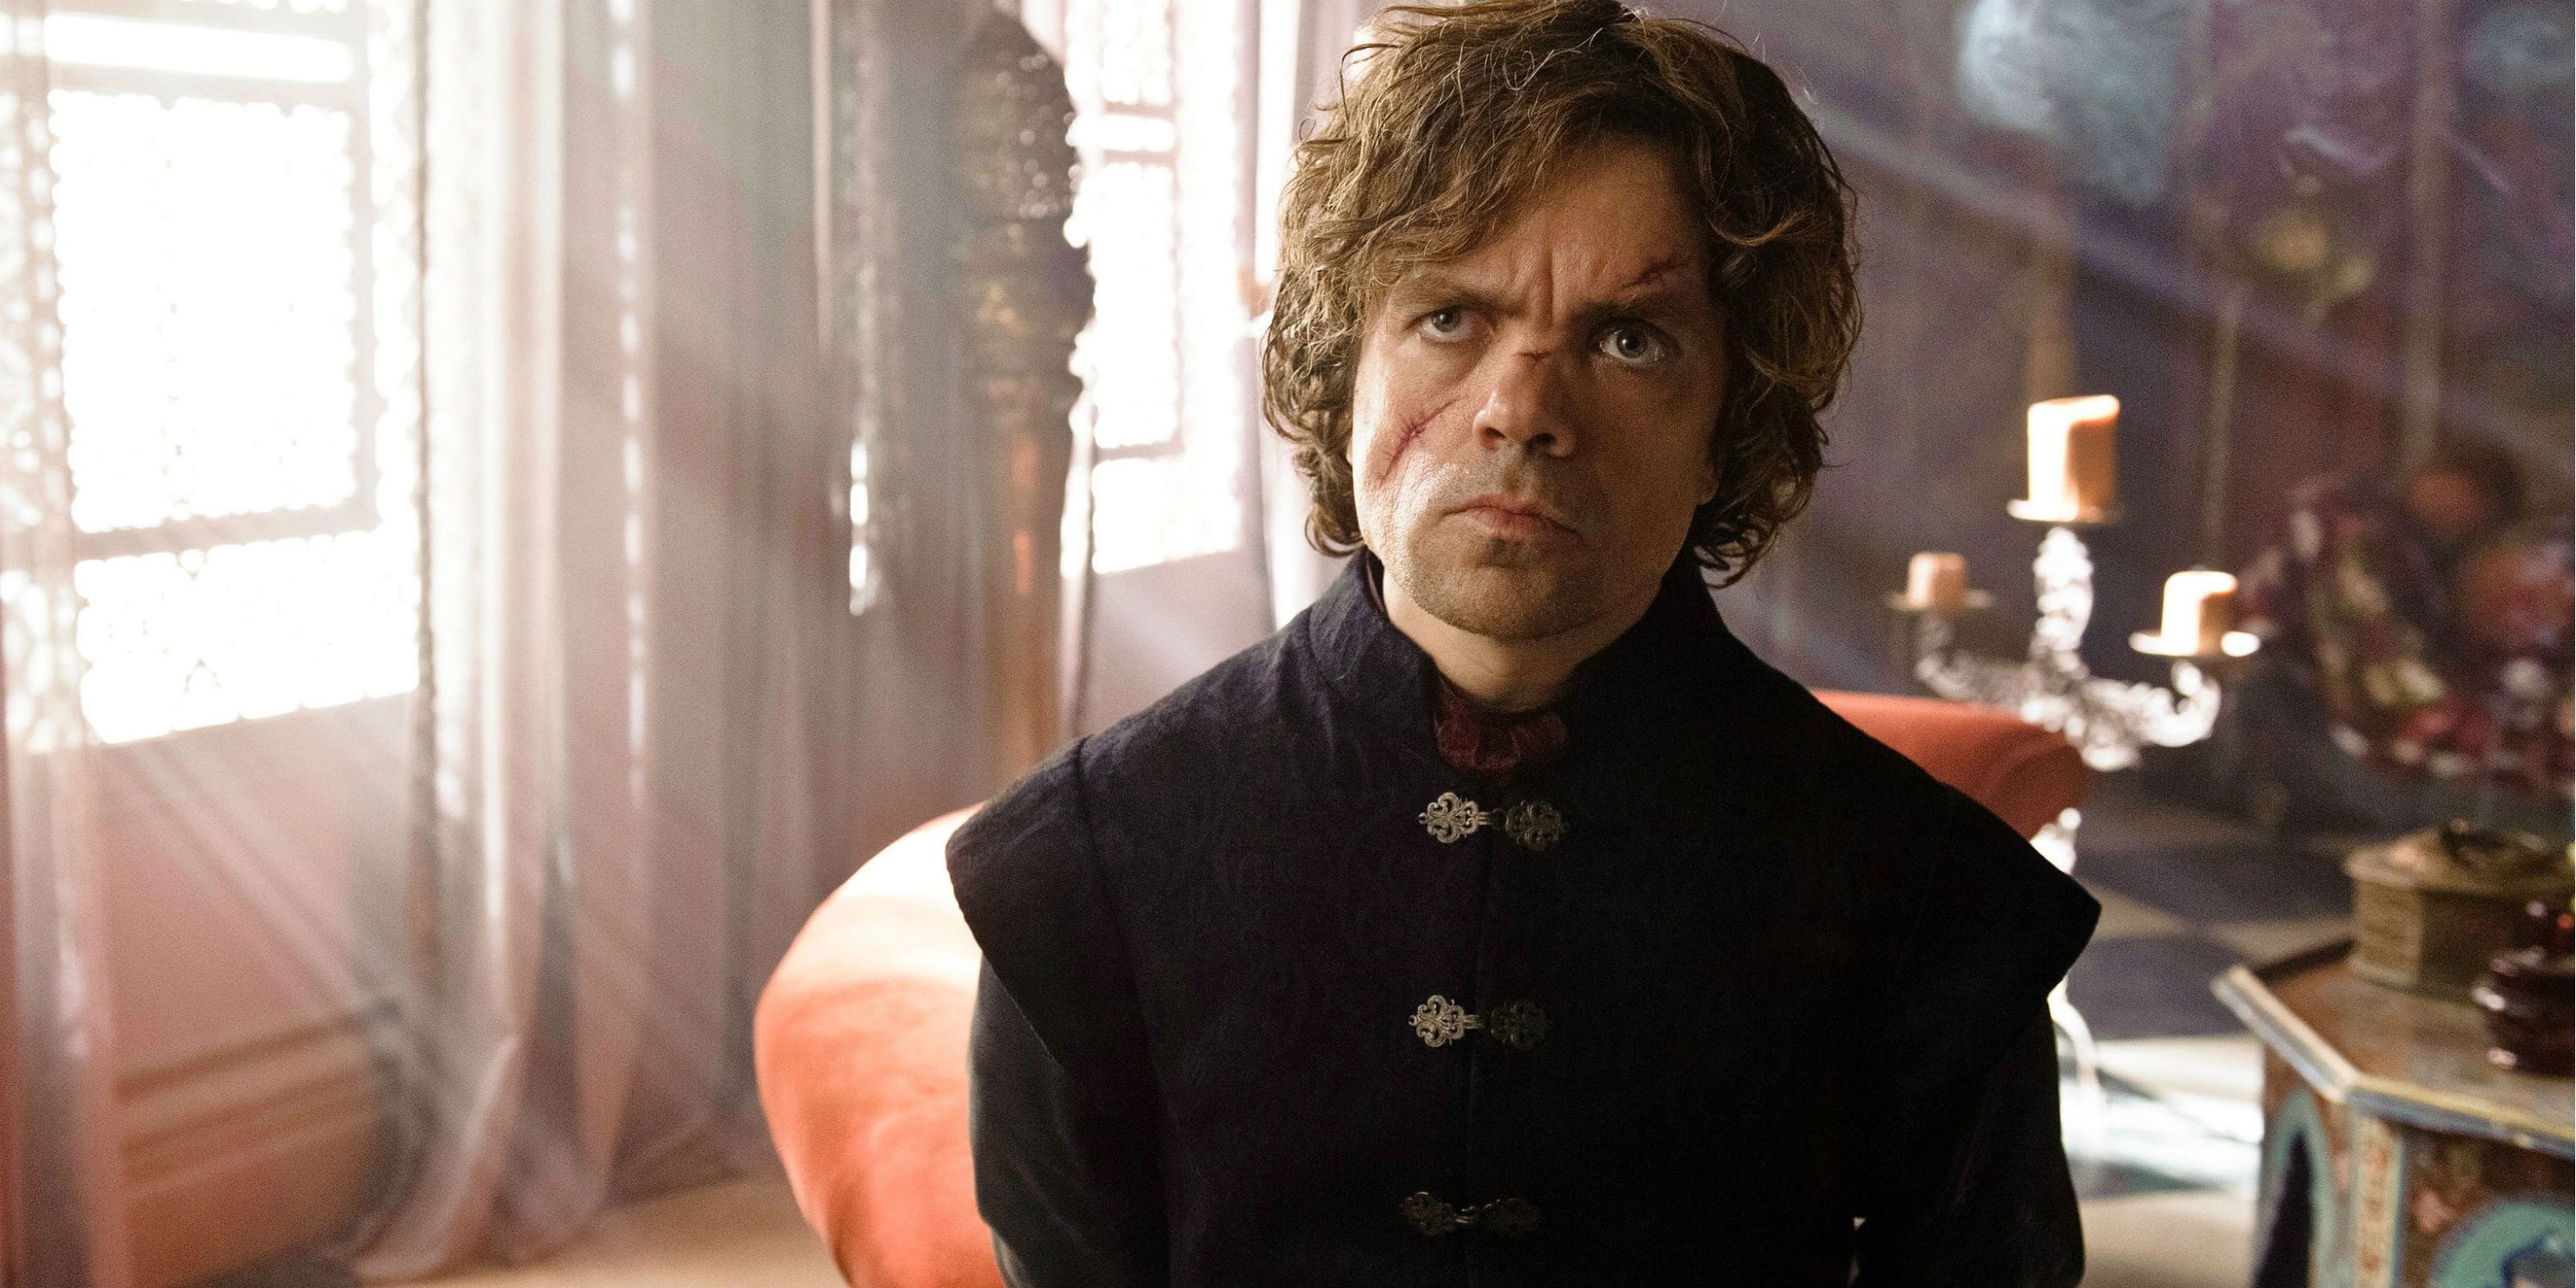 Tyrion Lannister from Game of Thrones with his scar.